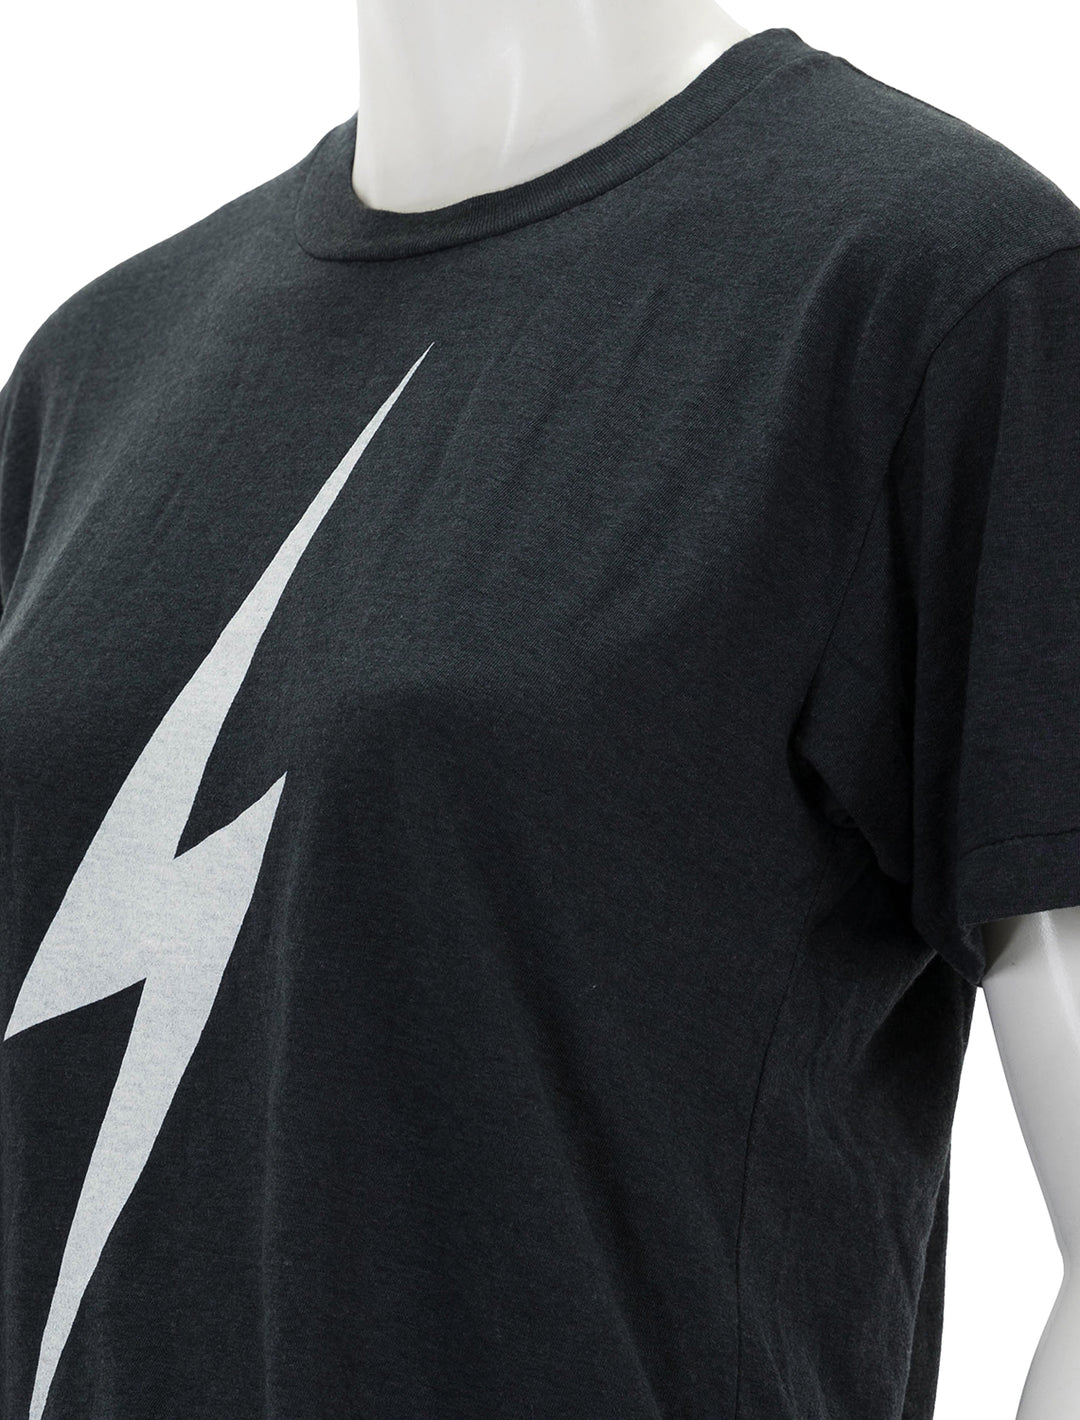 Close-up view of Aviator Nation's bolt boyfriend tee in charcoal.